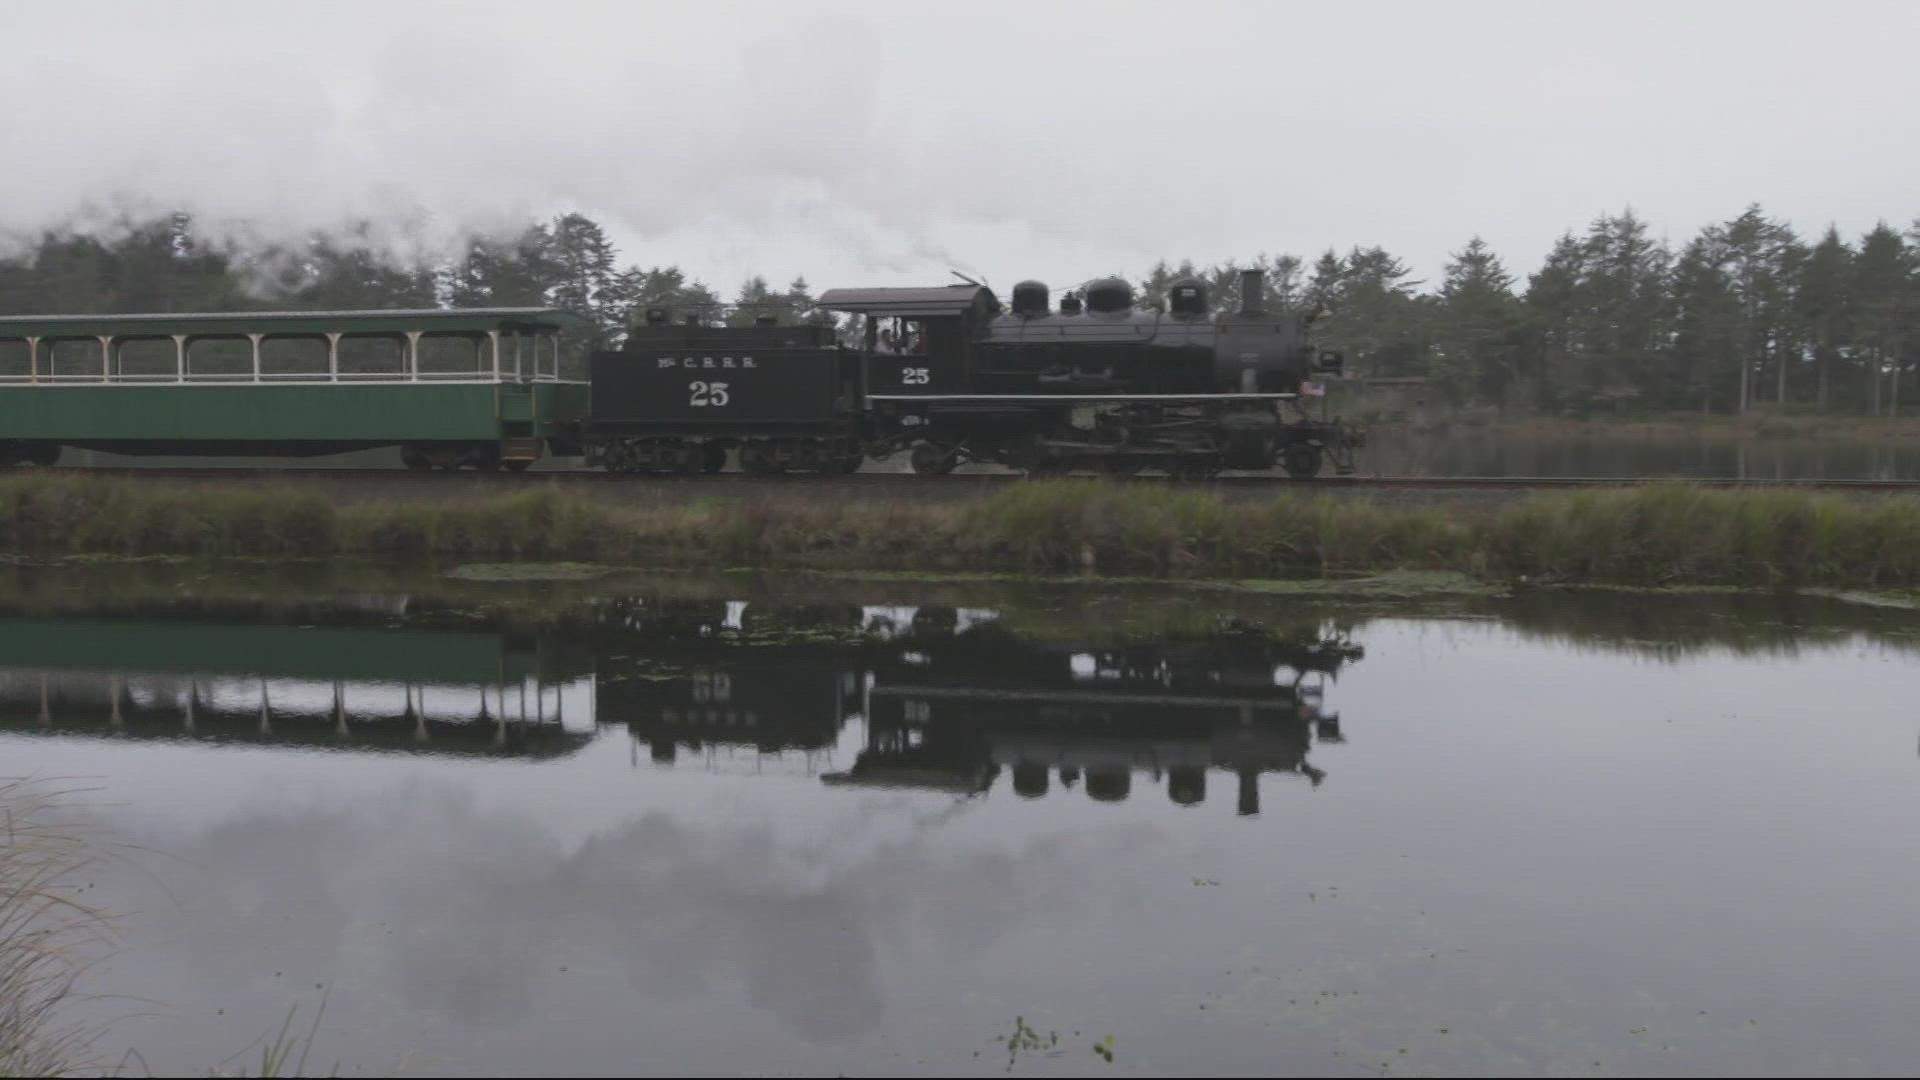 The Candy Cane Express, owned and operated by the Oregon Coast Scenic Railroad, takes on passengers at the Garibaldi Depot three times each Saturday and Sunday.